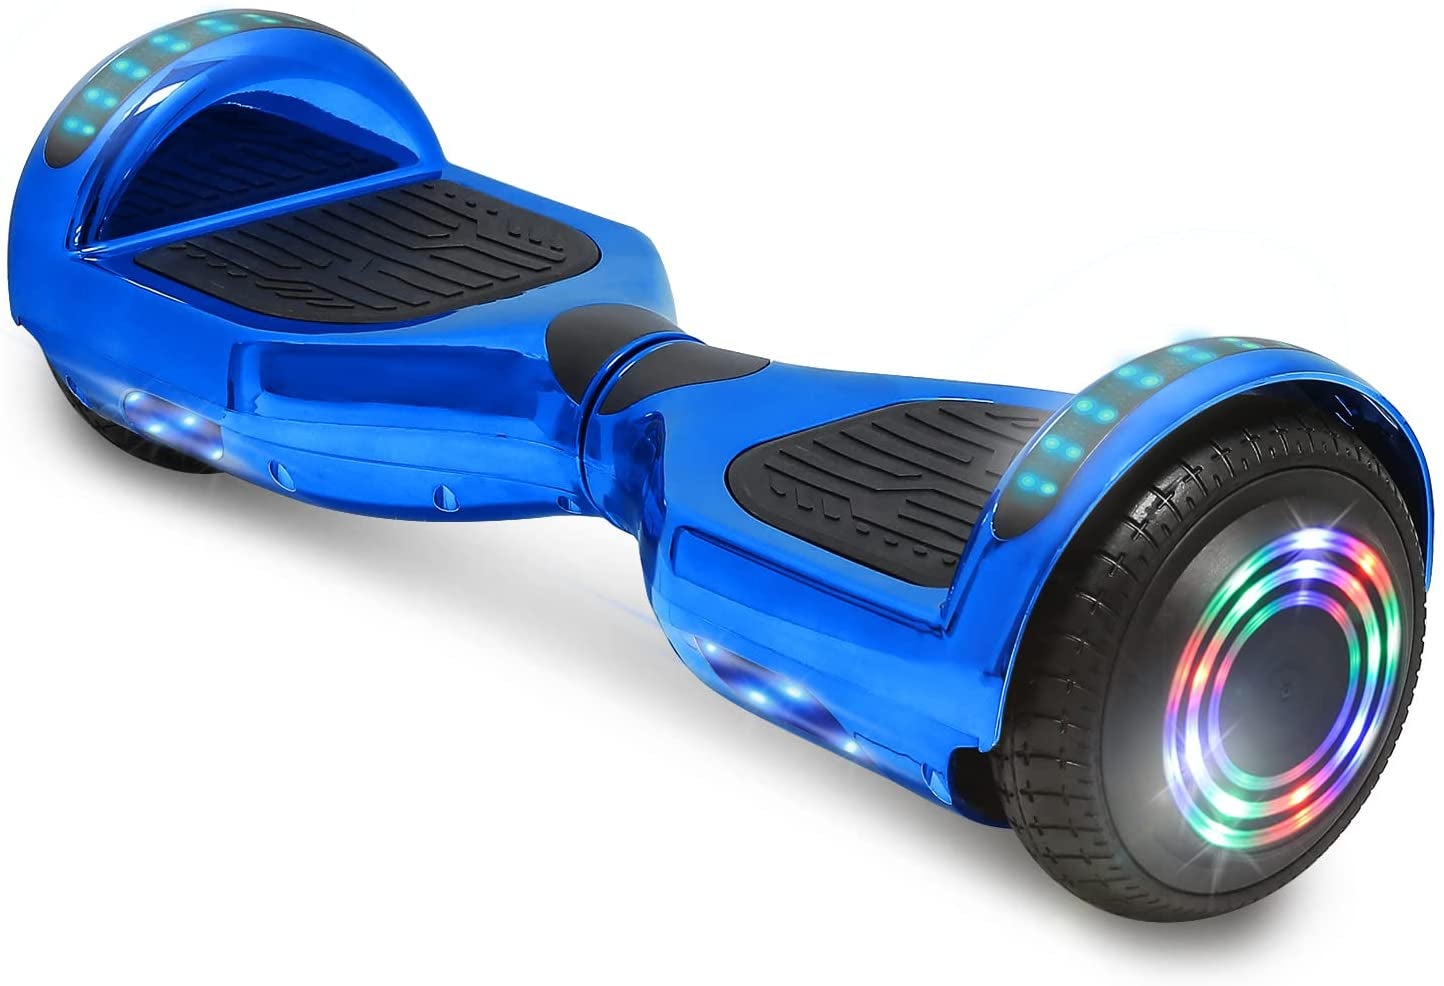 Neon blue hoverboard with colored lights on a white background